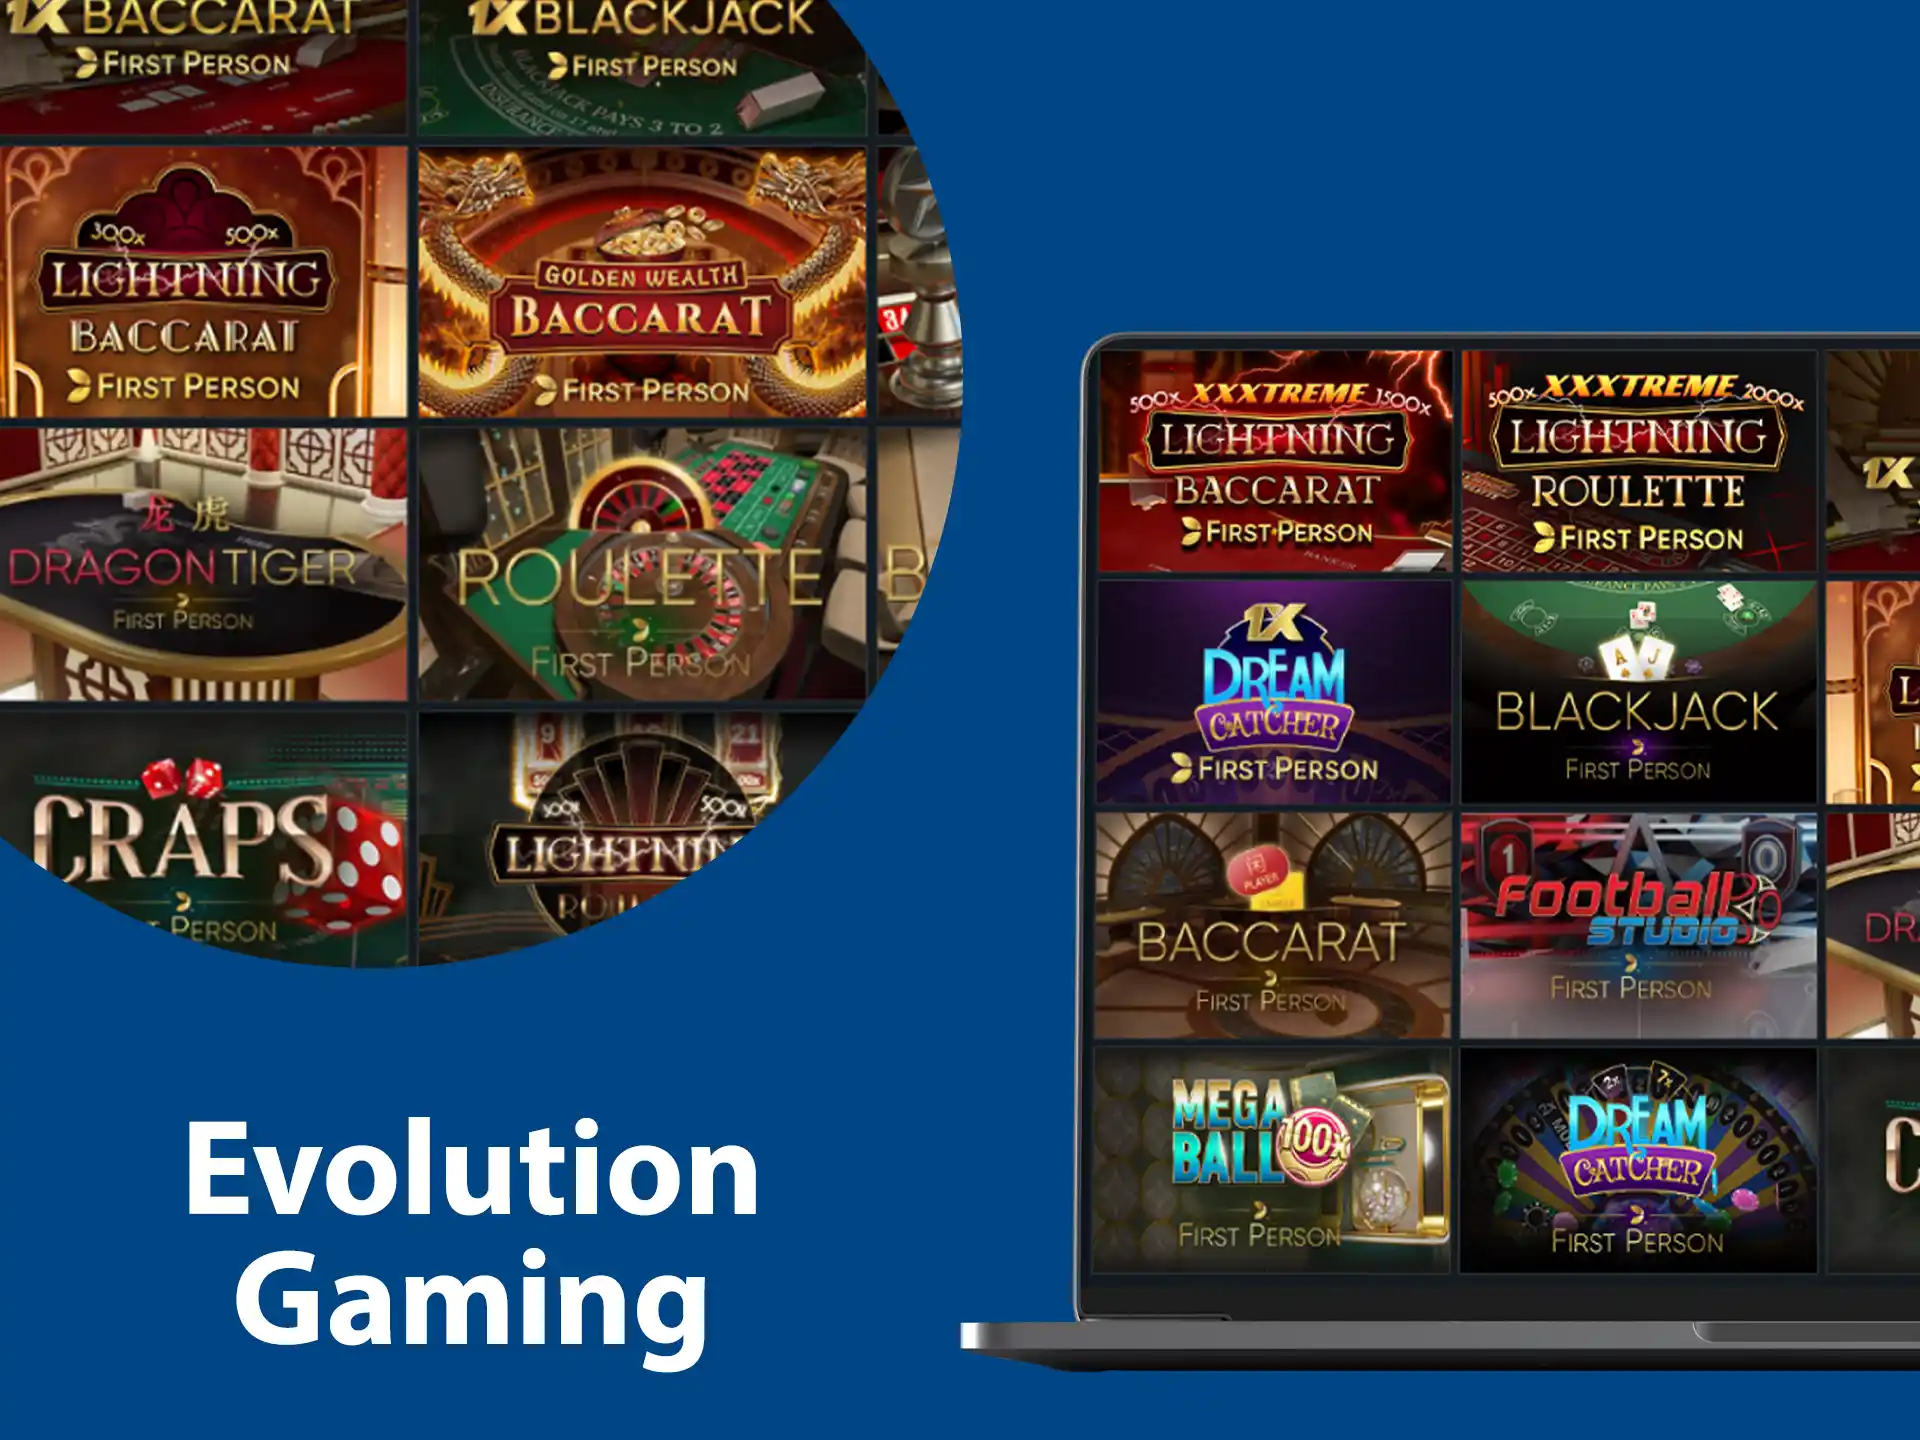 Evolution Gaming is one of the first gaming providers, provides the best gaming experience to players around the world.